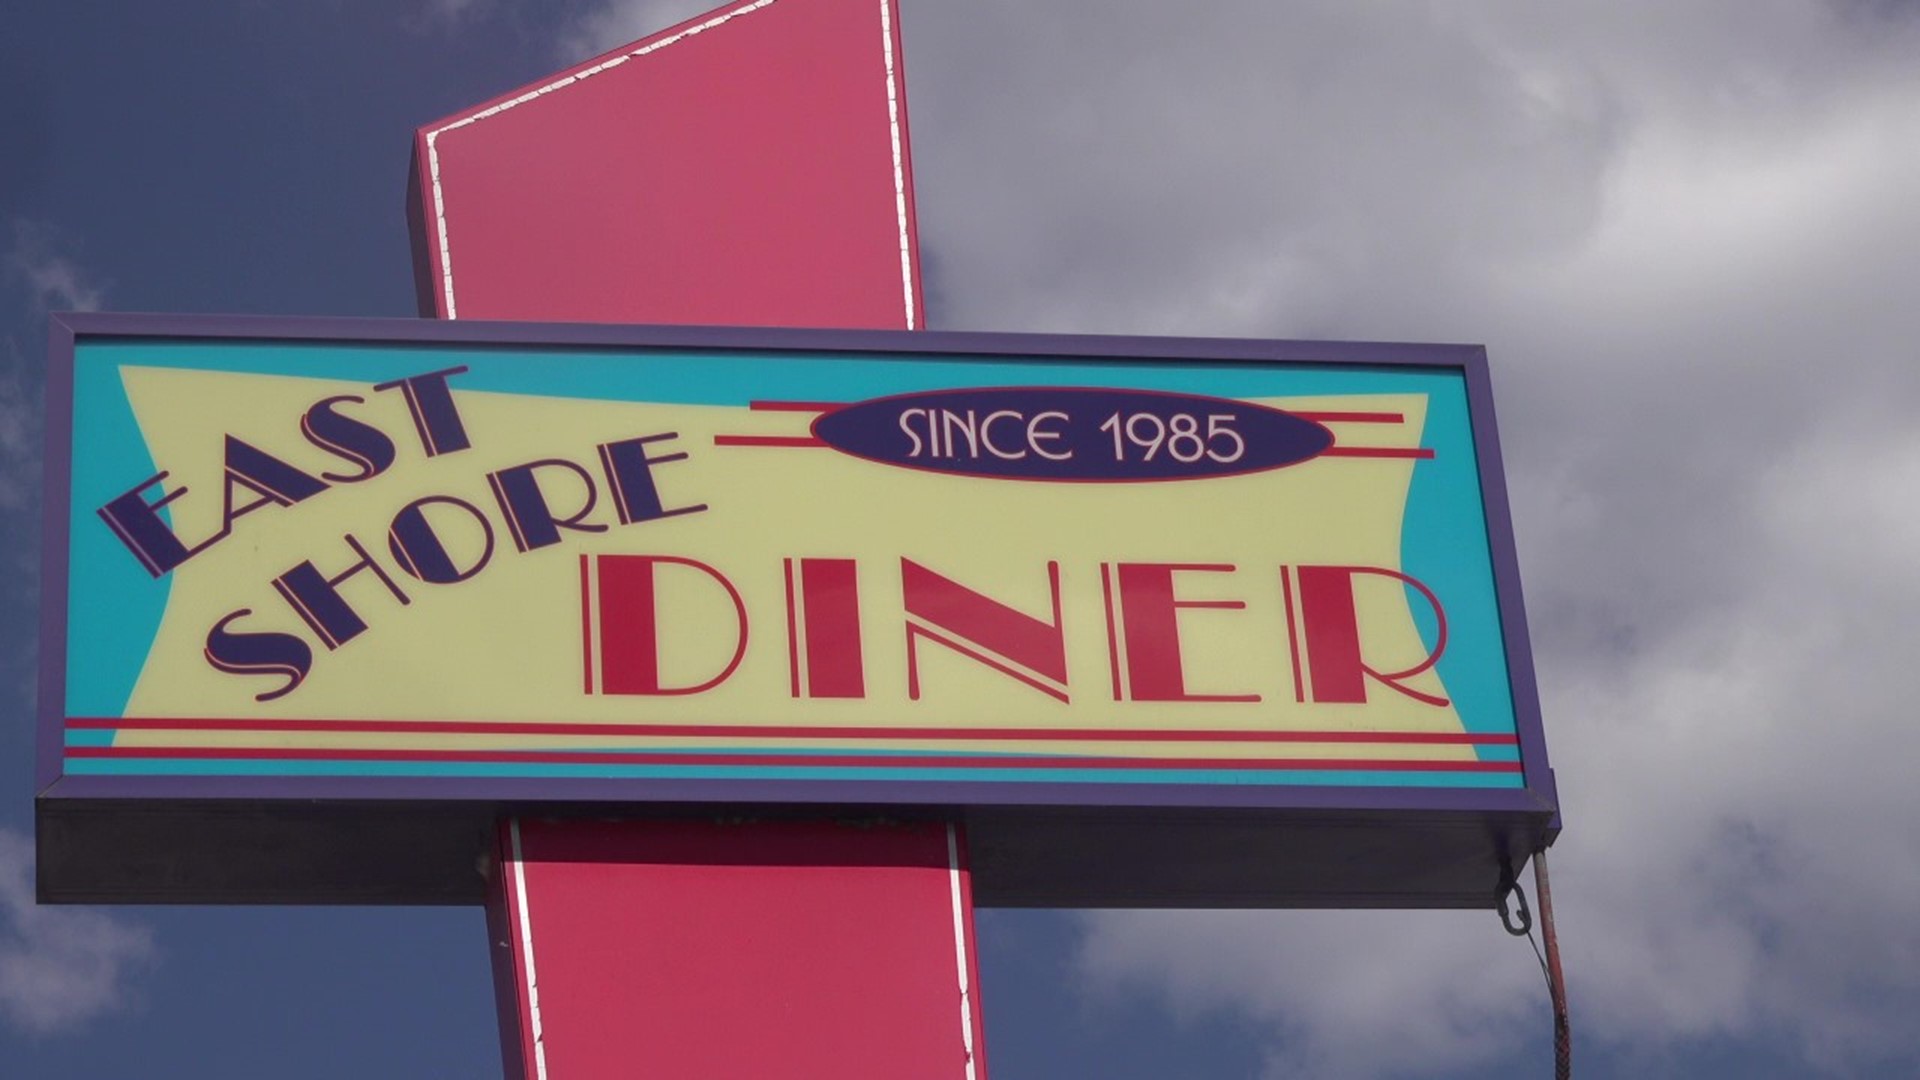 The diner is relocating to the west shore in Mechanicsburg due to the I-83 capital beltway project.